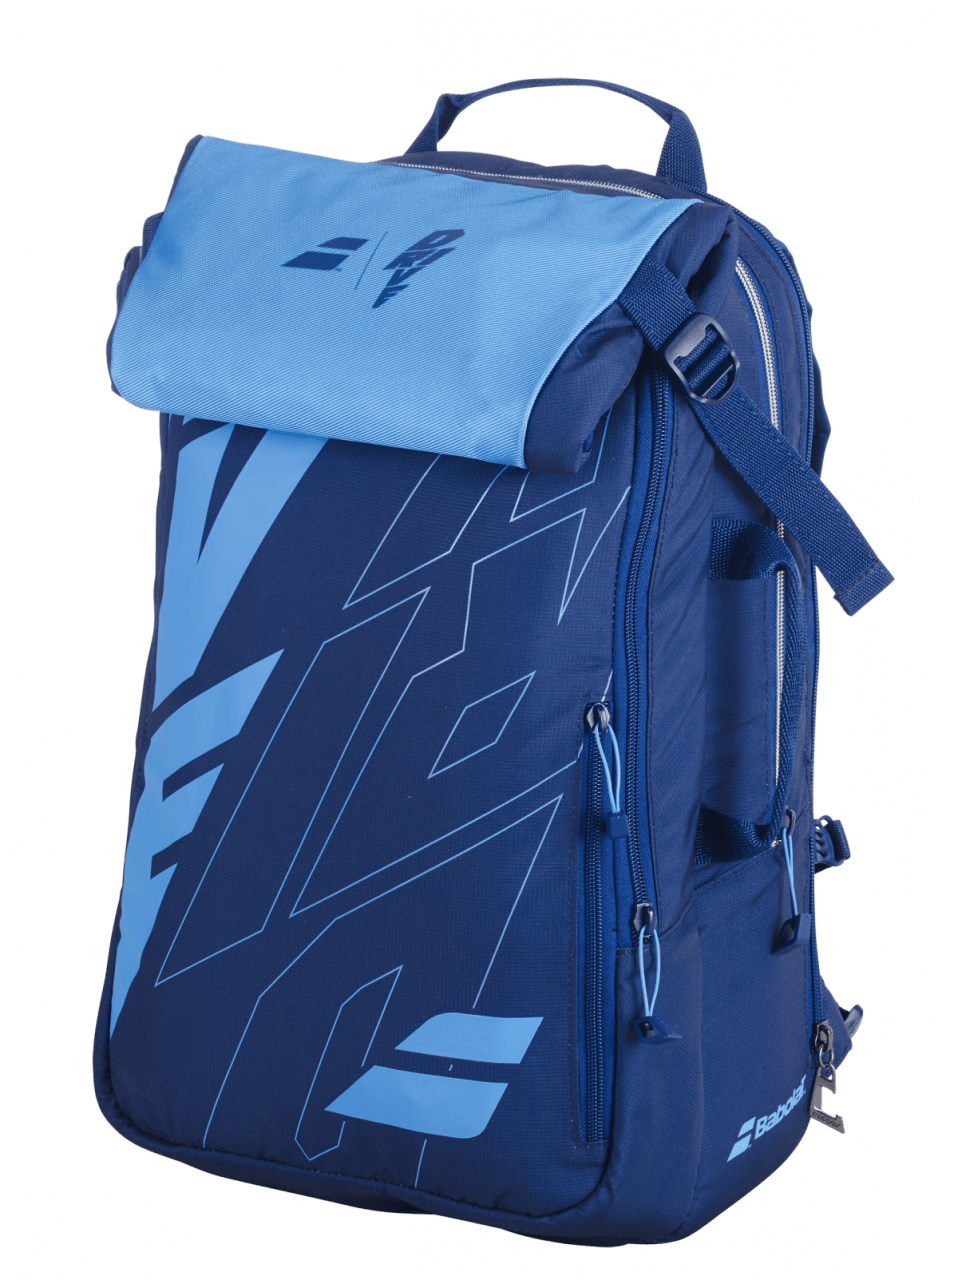 Tennistasche Babolat Backpack Pure Drive